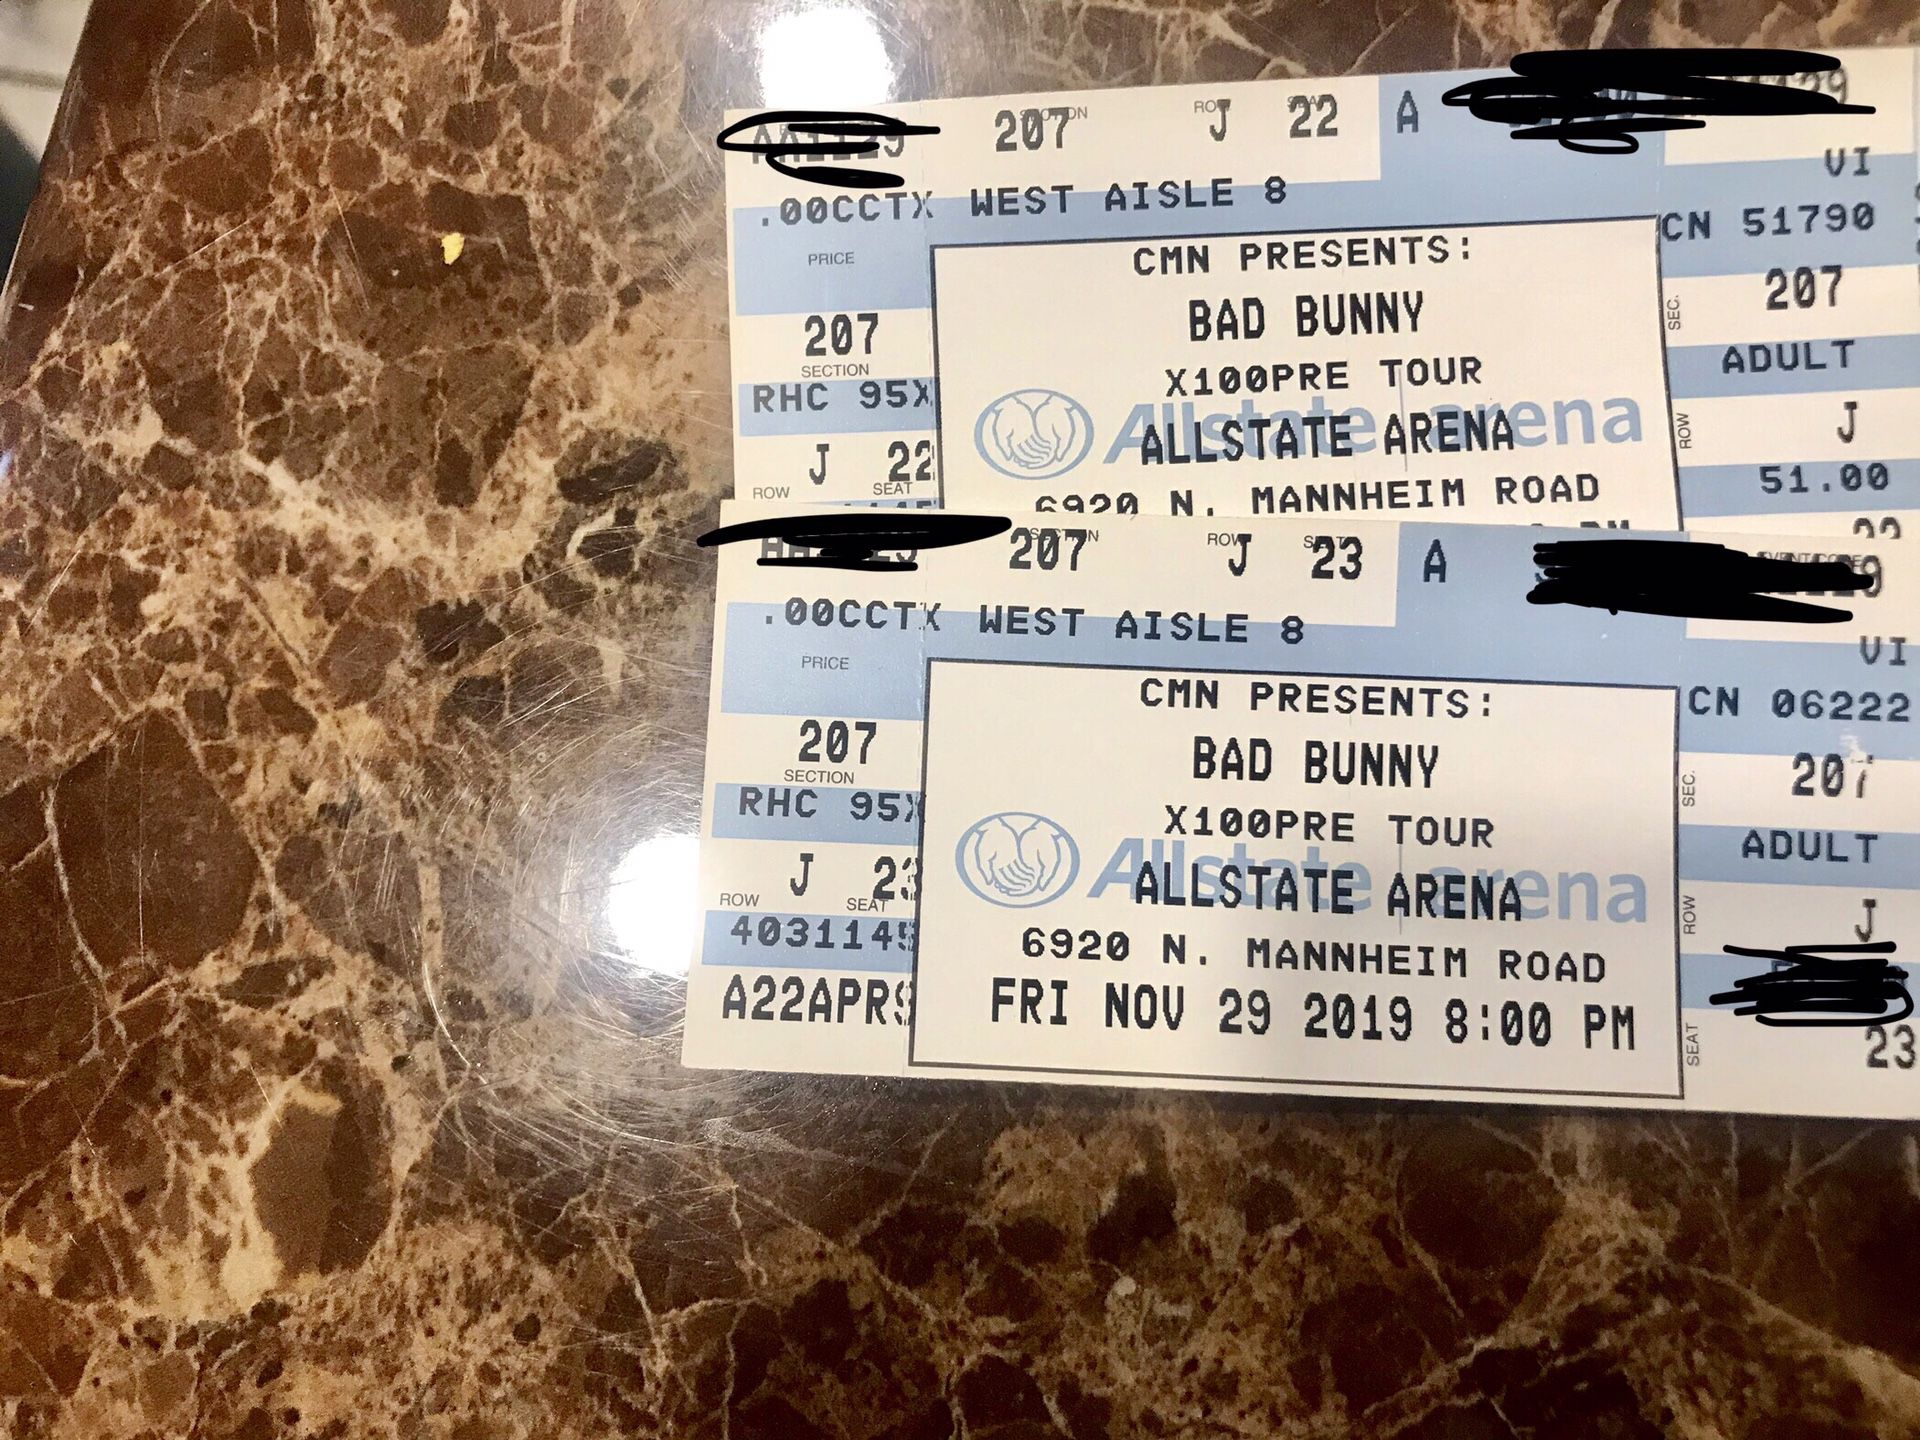 2 bad bunny tickets section 207 row j $160 for both